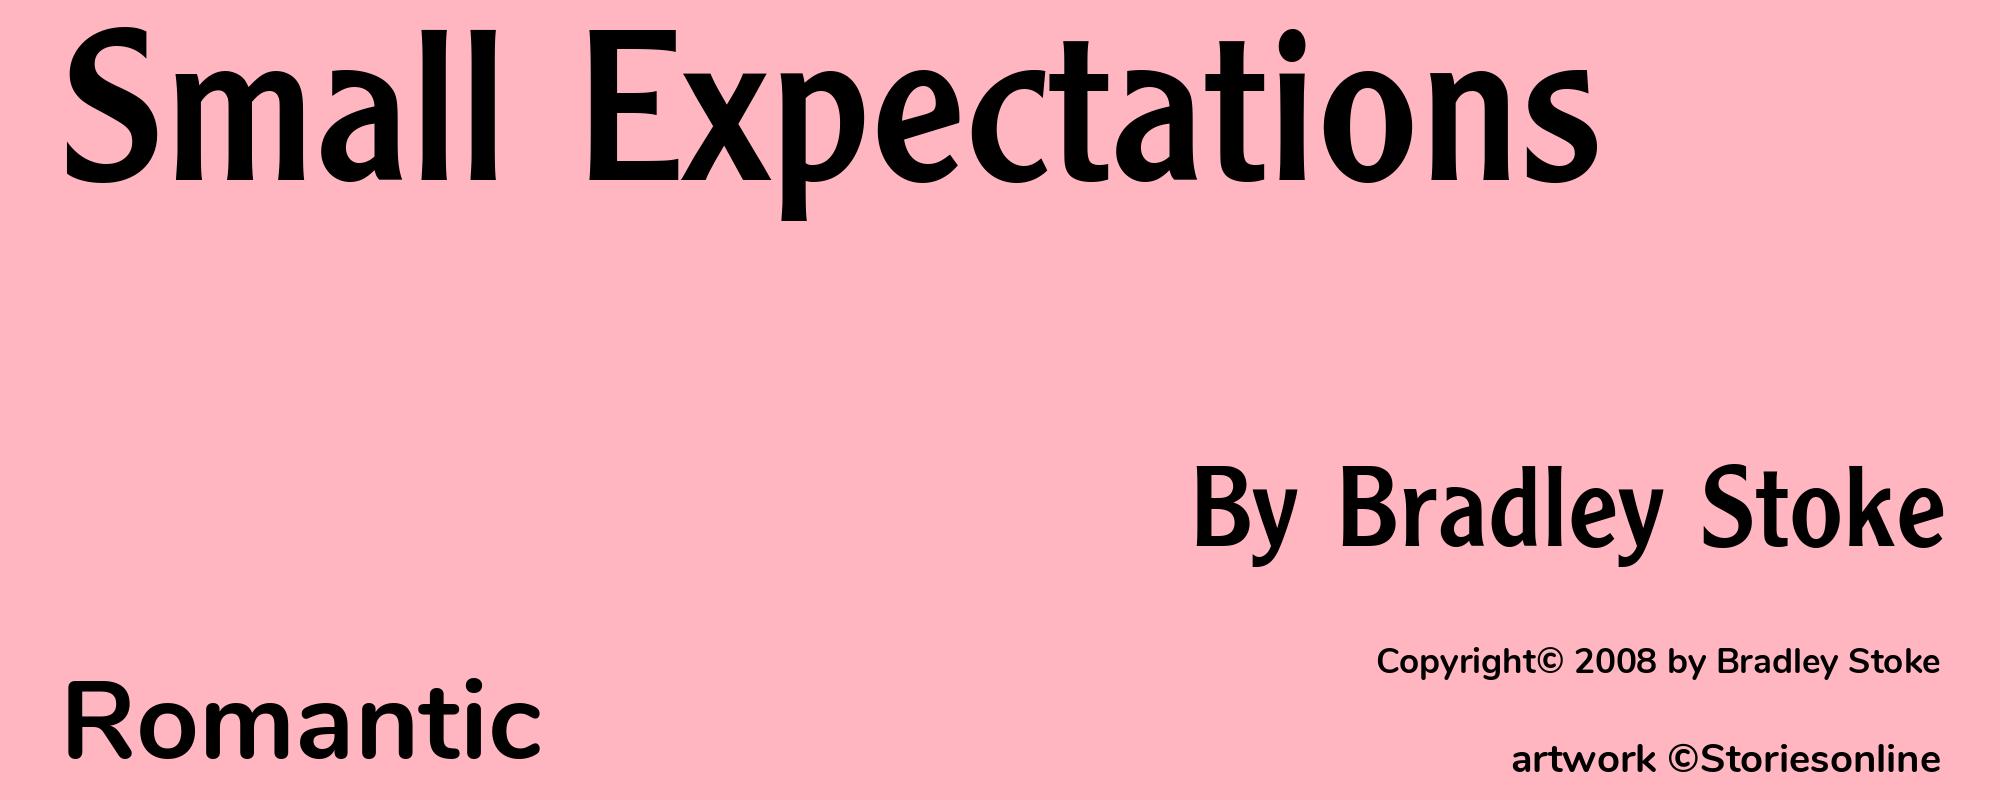 Small Expectations - Cover